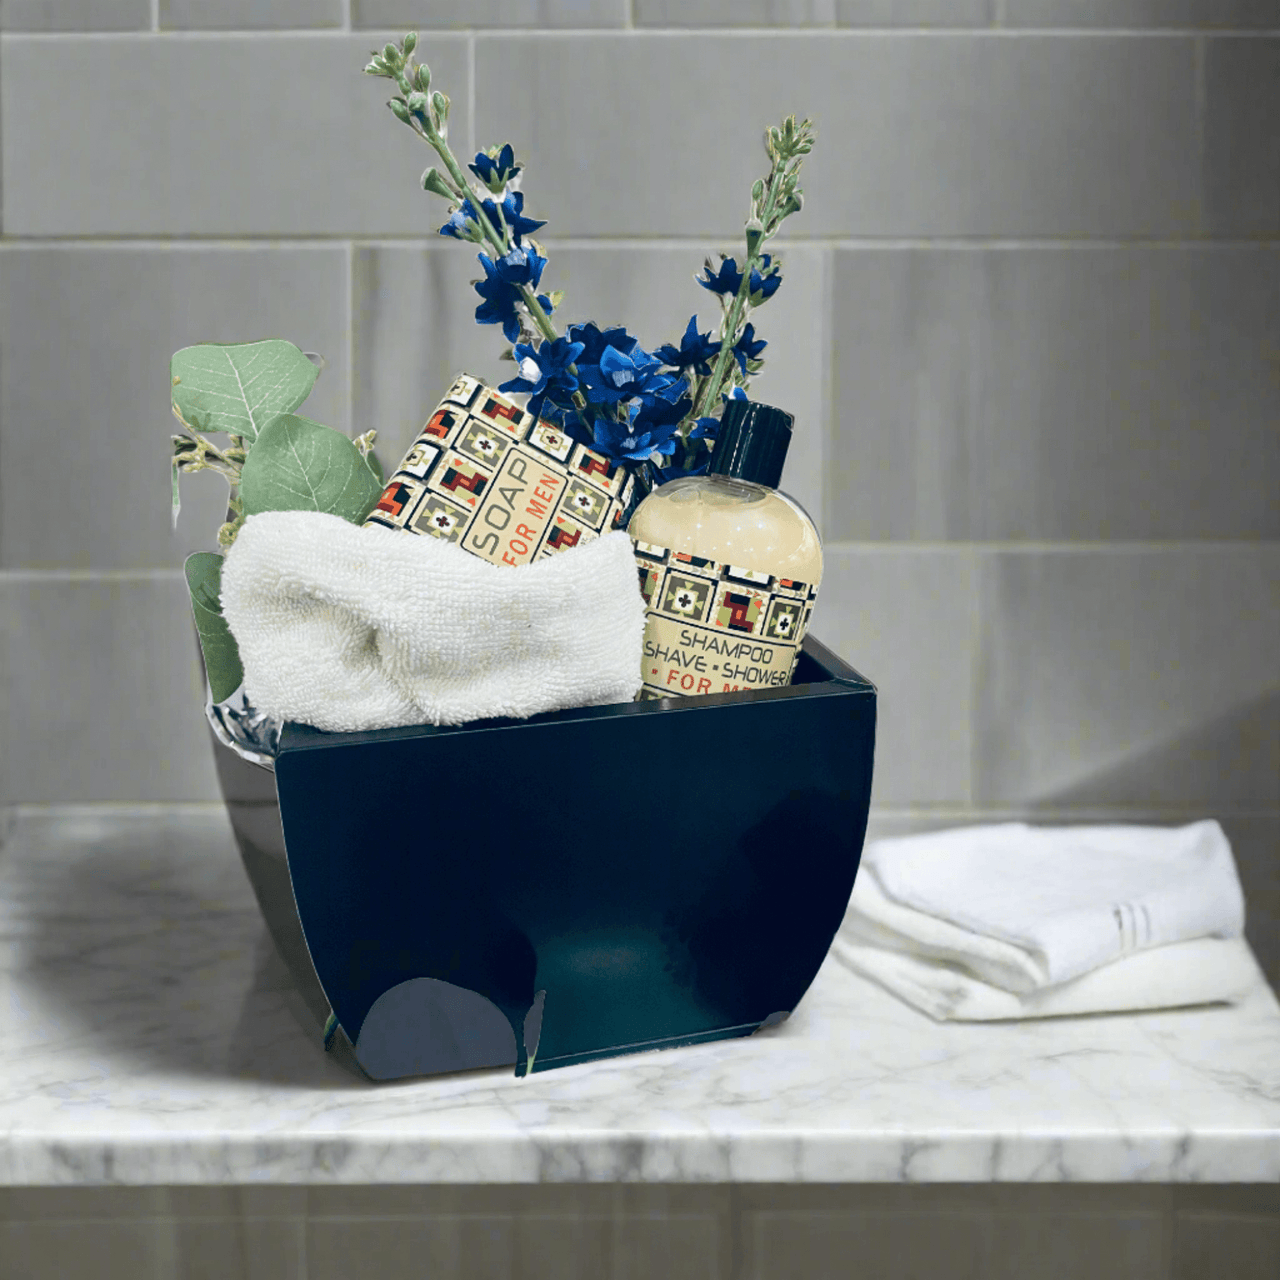 Elegant men's toiletry set with blue flowers, towels, and grooming products displayed on a marble surface.